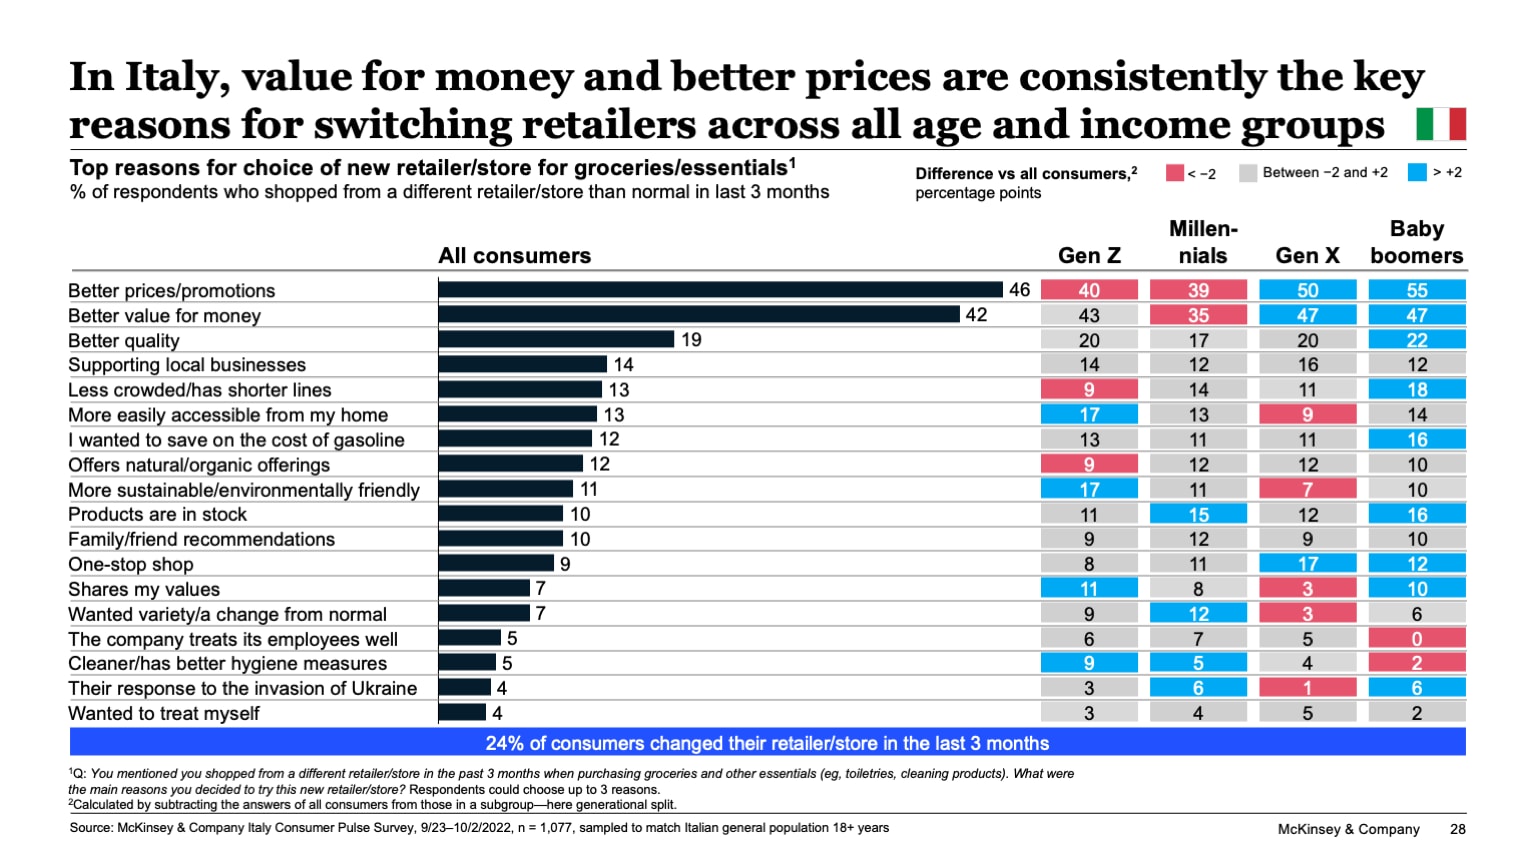 In Italy, value for money and better prices are consistently the key reasons for switching retailers across all age and income groups